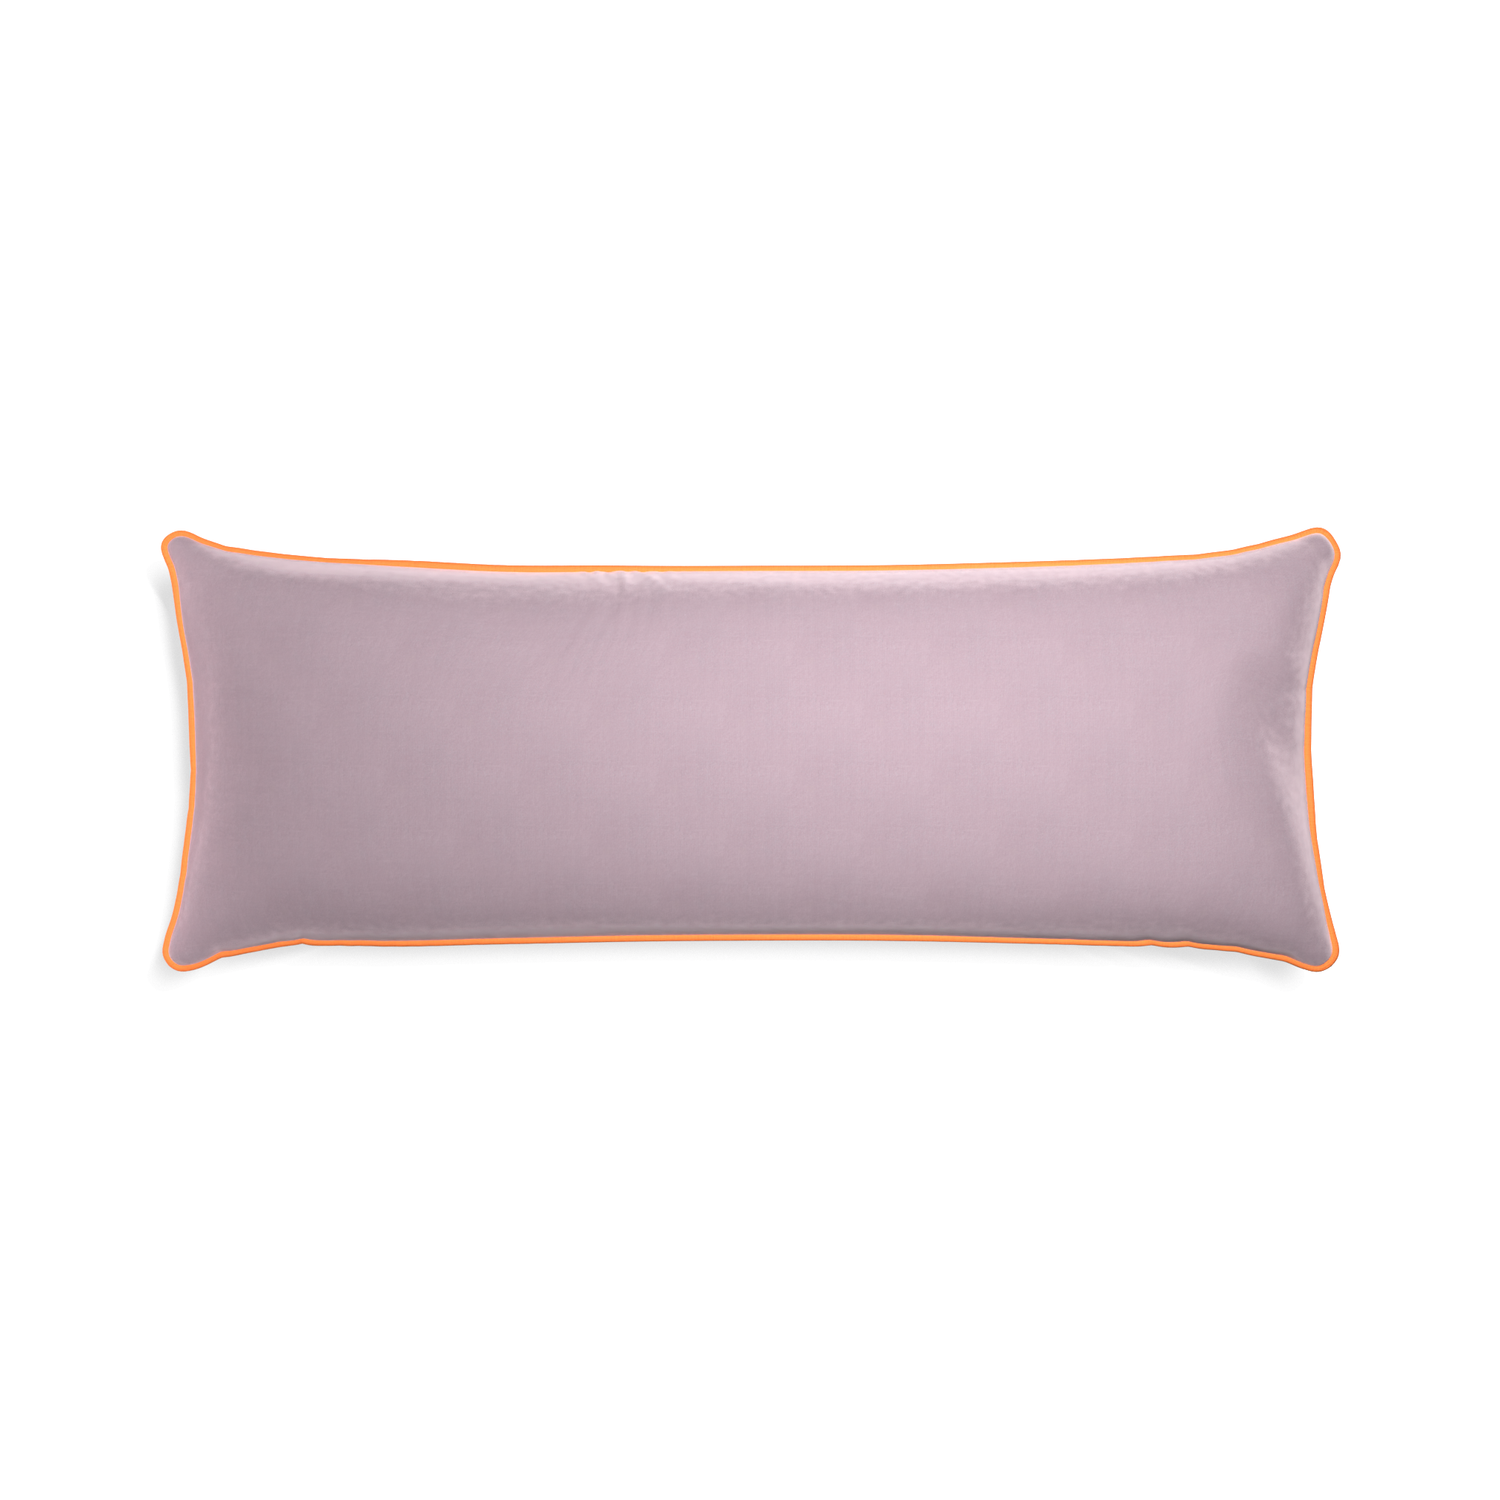 Xl-lumbar lilac velvet custom pillow with clementine piping on white background